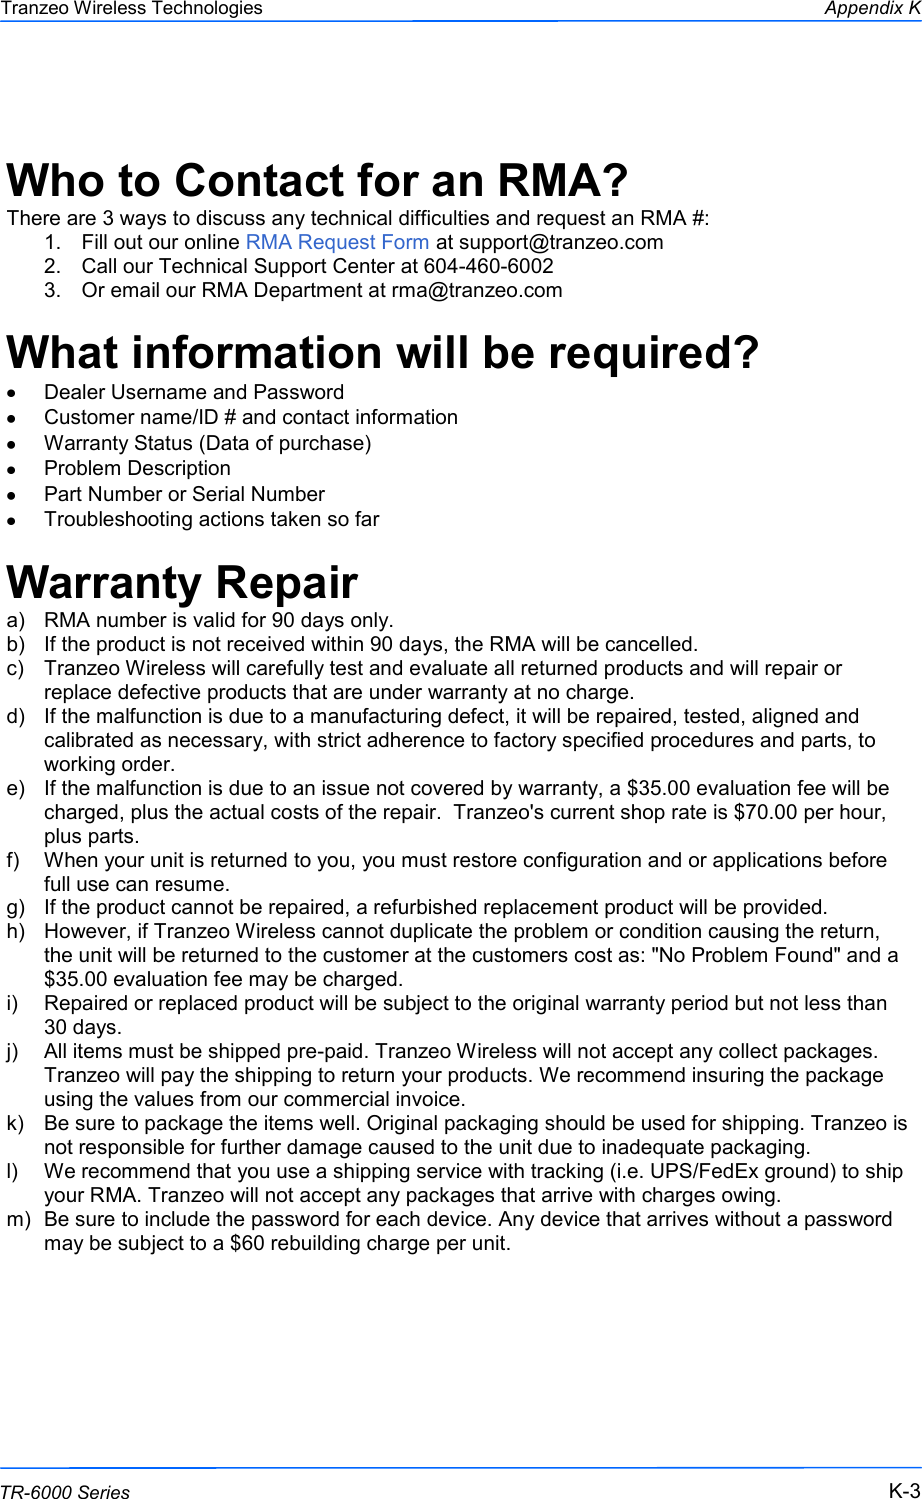  333 This document is intended for Public Distribution                         19473 Fraser Way, Pitt Meadows, B.C. Canada V3Y  2V4 Appendix K K-3 TR-6000 Series Tranzeo Wireless Technologies  Who to Contact for an RMA? There are 3 ways to discuss any technical difficulties and request an RMA #:  1.  Fill out our online RMA Request Form at support@tranzeo.com  2.  Call our Technical Support Center at 604-460-6002 3.  Or email our RMA Department at rma@tranzeo.com  What information will be required? Dealer Username and Password Customer name/ID # and contact information Warranty Status (Data of purchase) Problem Description Part Number or Serial Number Troubleshooting actions taken so far  Warranty Repair a)  RMA number is valid for 90 days only. b)  If the product is not received within 90 days, the RMA will be cancelled. c)  Tranzeo Wireless will carefully test and evaluate all returned products and will repair or replace defective products that are under warranty at no charge. d)  If the malfunction is due to a manufacturing defect, it will be repaired, tested, aligned and calibrated as necessary, with strict adherence to factory specified procedures and parts, to working order. e)  If the malfunction is due to an issue not covered by warranty, a $35.00 evaluation fee will be charged, plus the actual costs of the repair.  Tranzeo&apos;s current shop rate is $70.00 per hour, plus parts. f)  When your unit is returned to you, you must restore configuration and or applications before full use can resume. g)  If the product cannot be repaired, a refurbished replacement product will be provided. h)  However, if Tranzeo Wireless cannot duplicate the problem or condition causing the return, the unit will be returned to the customer at the customers cost as: &quot;No Problem Found&quot; and a $35.00 evaluation fee may be charged. i)  Repaired or replaced product will be subject to the original warranty period but not less than 30 days. j)  All items must be shipped pre-paid. Tranzeo Wireless will not accept any collect packages. Tranzeo will pay the shipping to return your products. We recommend insuring the package using the values from our commercial invoice. k)  Be sure to package the items well. Original packaging should be used for shipping. Tranzeo is not responsible for further damage caused to the unit due to inadequate packaging. l)  We recommend that you use a shipping service with tracking (i.e. UPS/FedEx ground) to ship your RMA. Tranzeo will not accept any packages that arrive with charges owing. m)  Be sure to include the password for each device. Any device that arrives without a password may be subject to a $60 rebuilding charge per unit.    